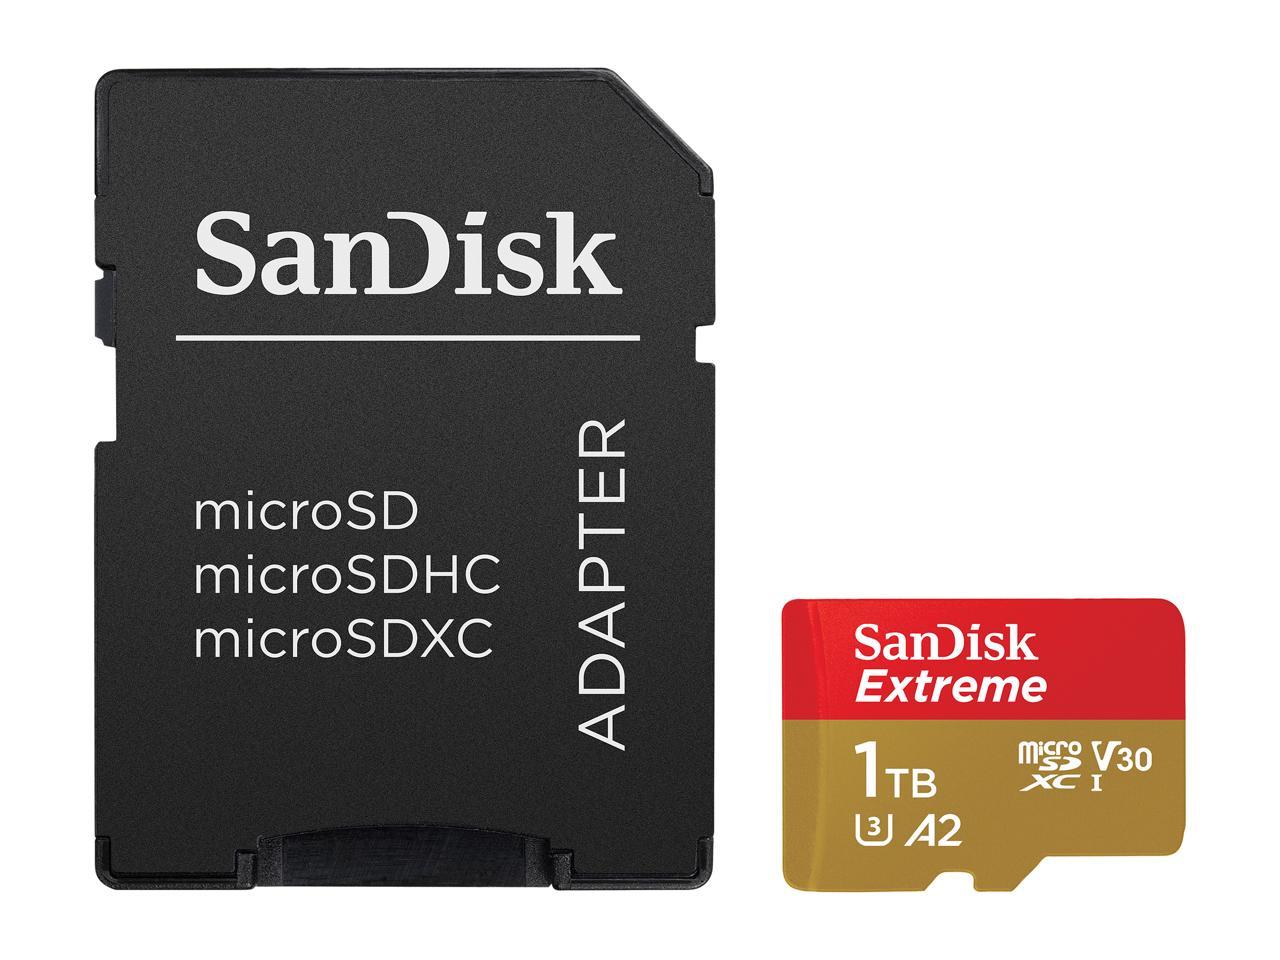 Sandisk 1tb Extreme Microsdxc Uhs I U3 Memory Card With Adapter Speed Up To 160mb S Sdsqxa1 1t00 Gn6ma Newegg Com